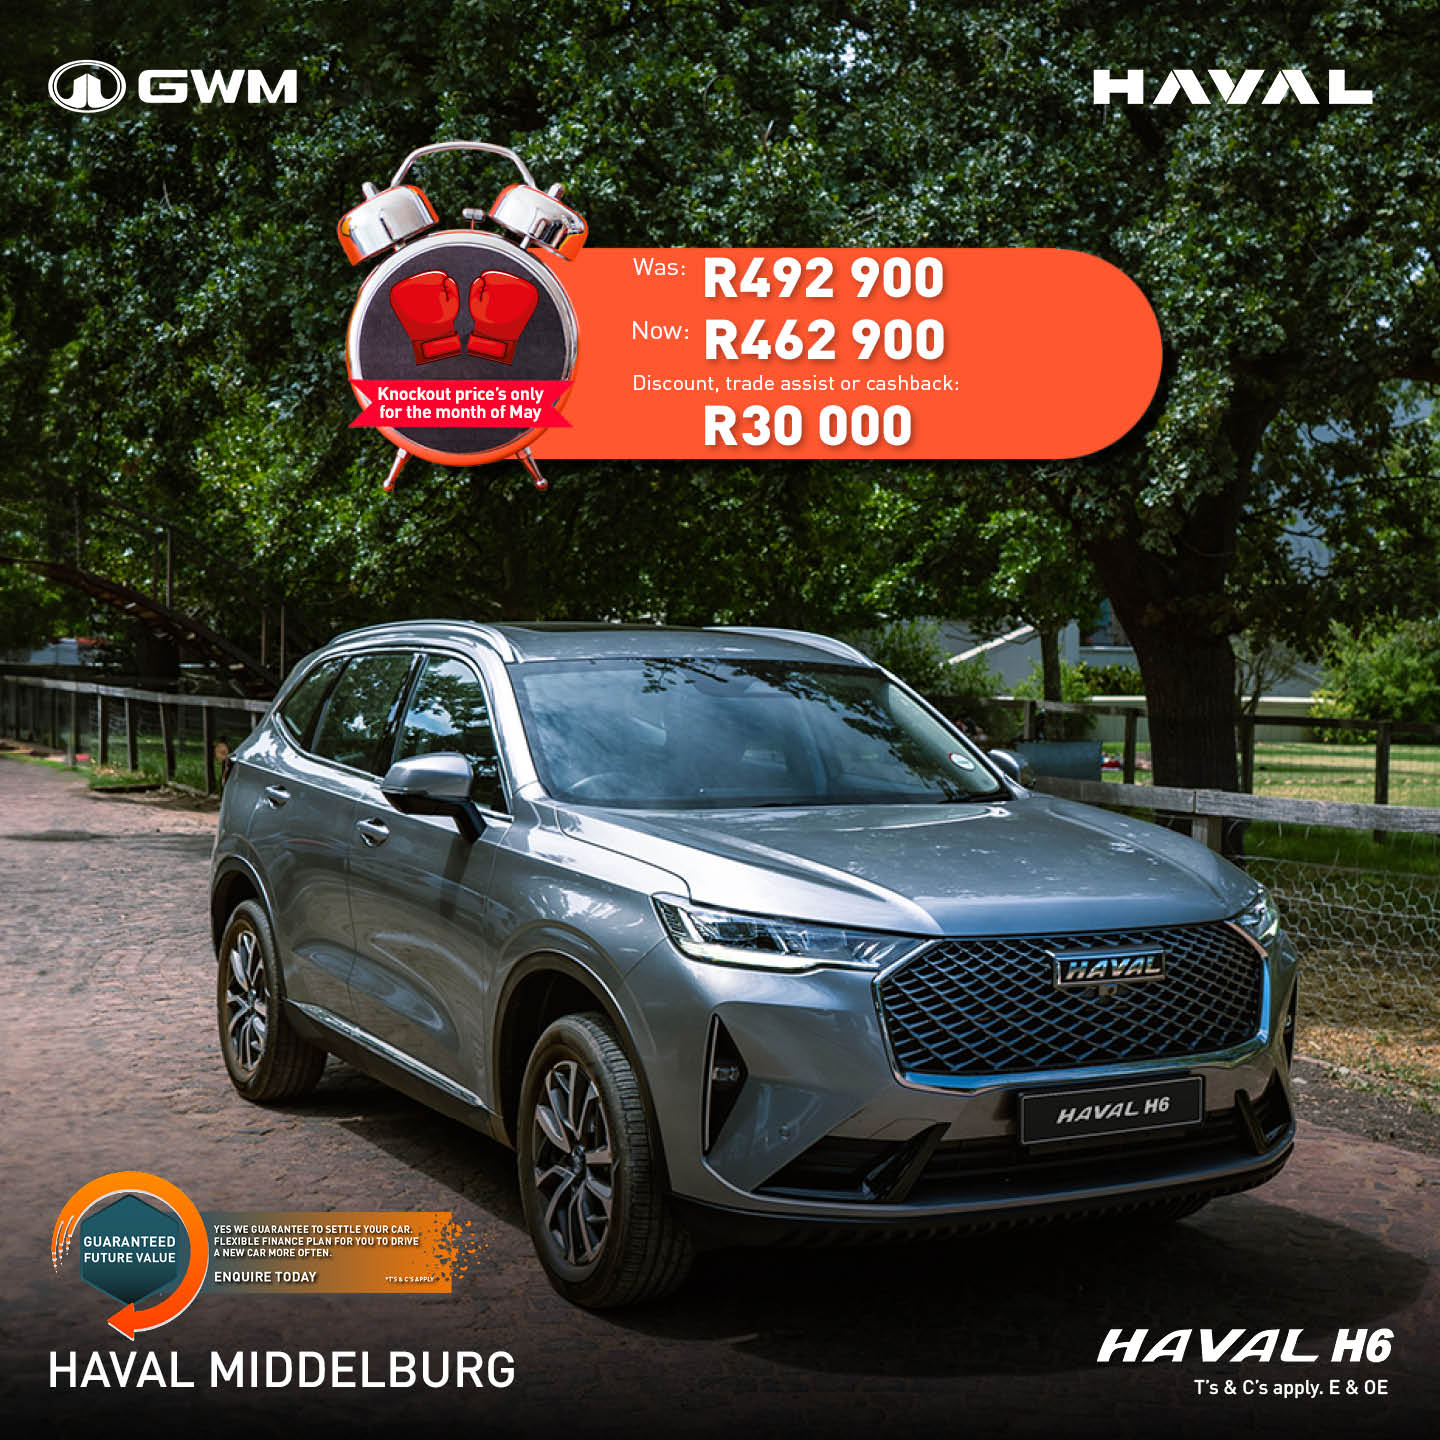 Haval H6 image from 